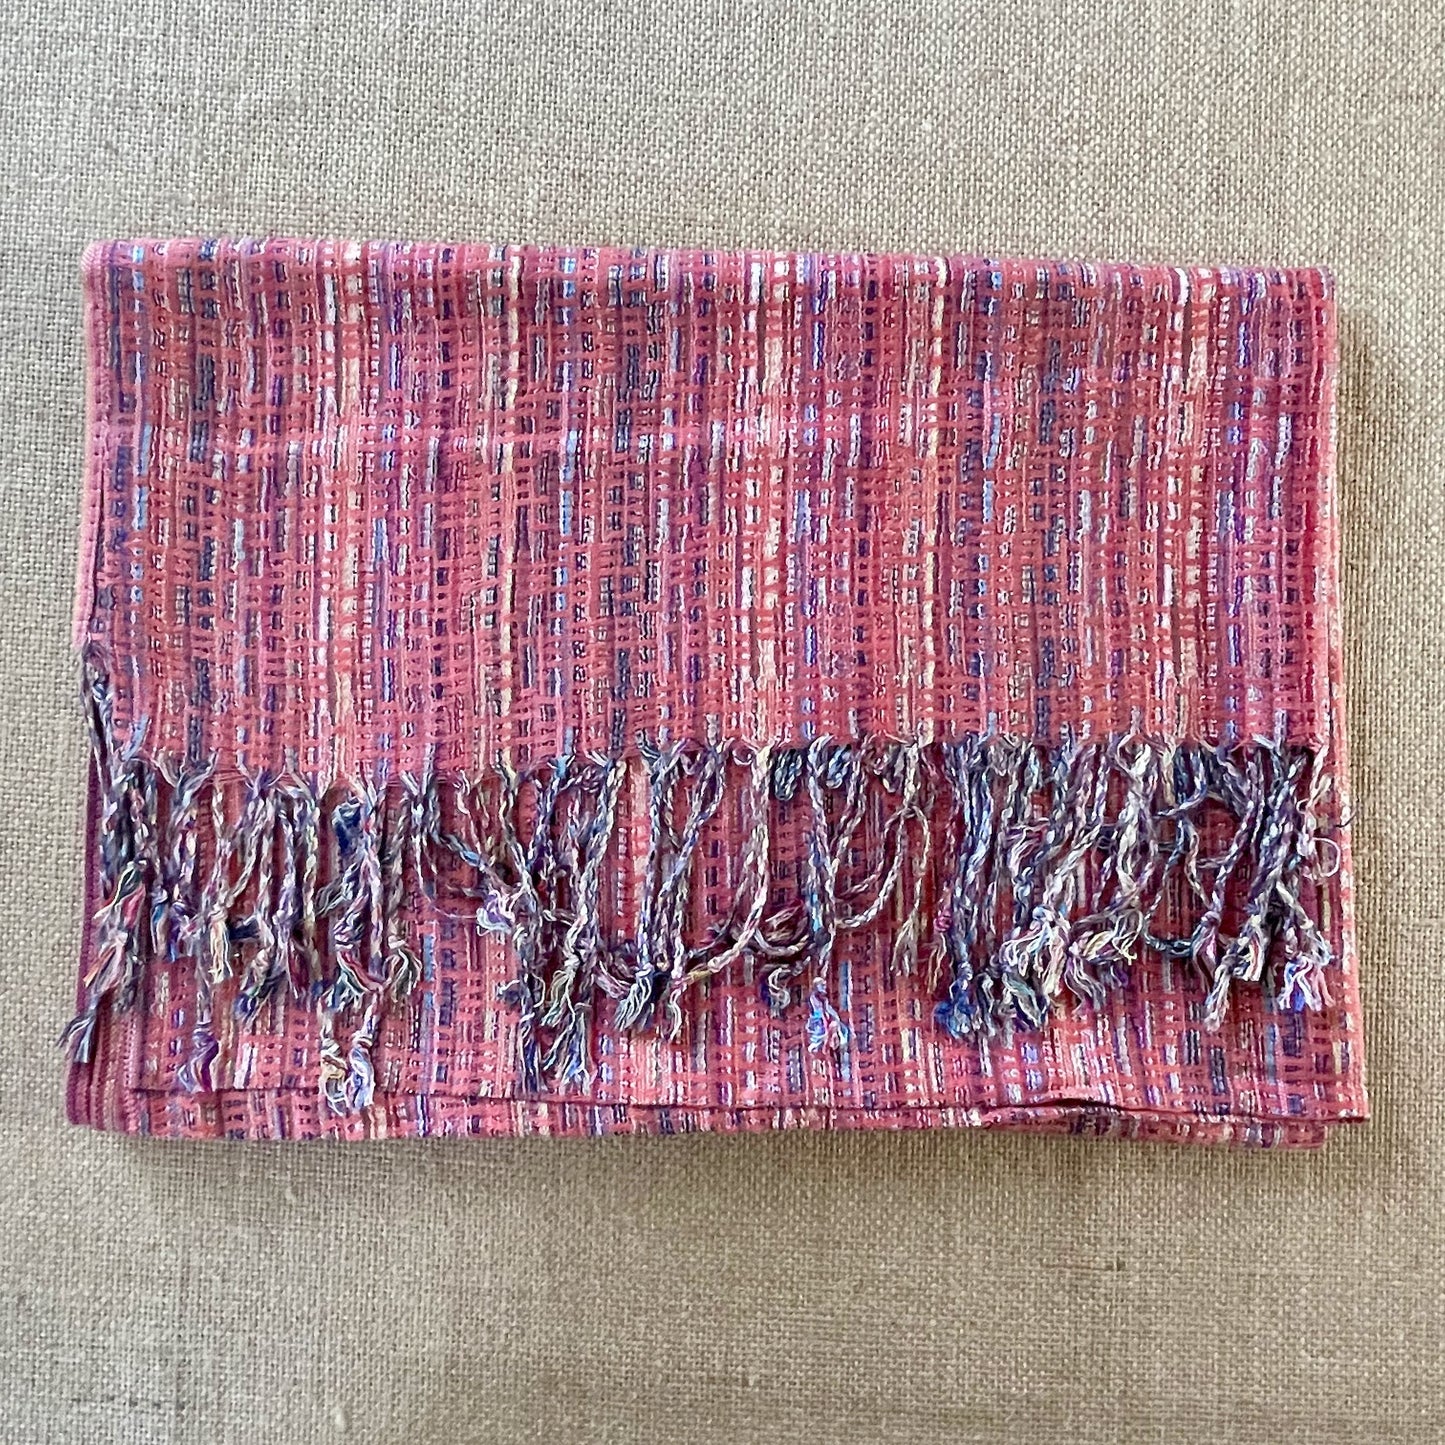 Woven Moroccan Pashmina Scarf in Salmon Pink folded